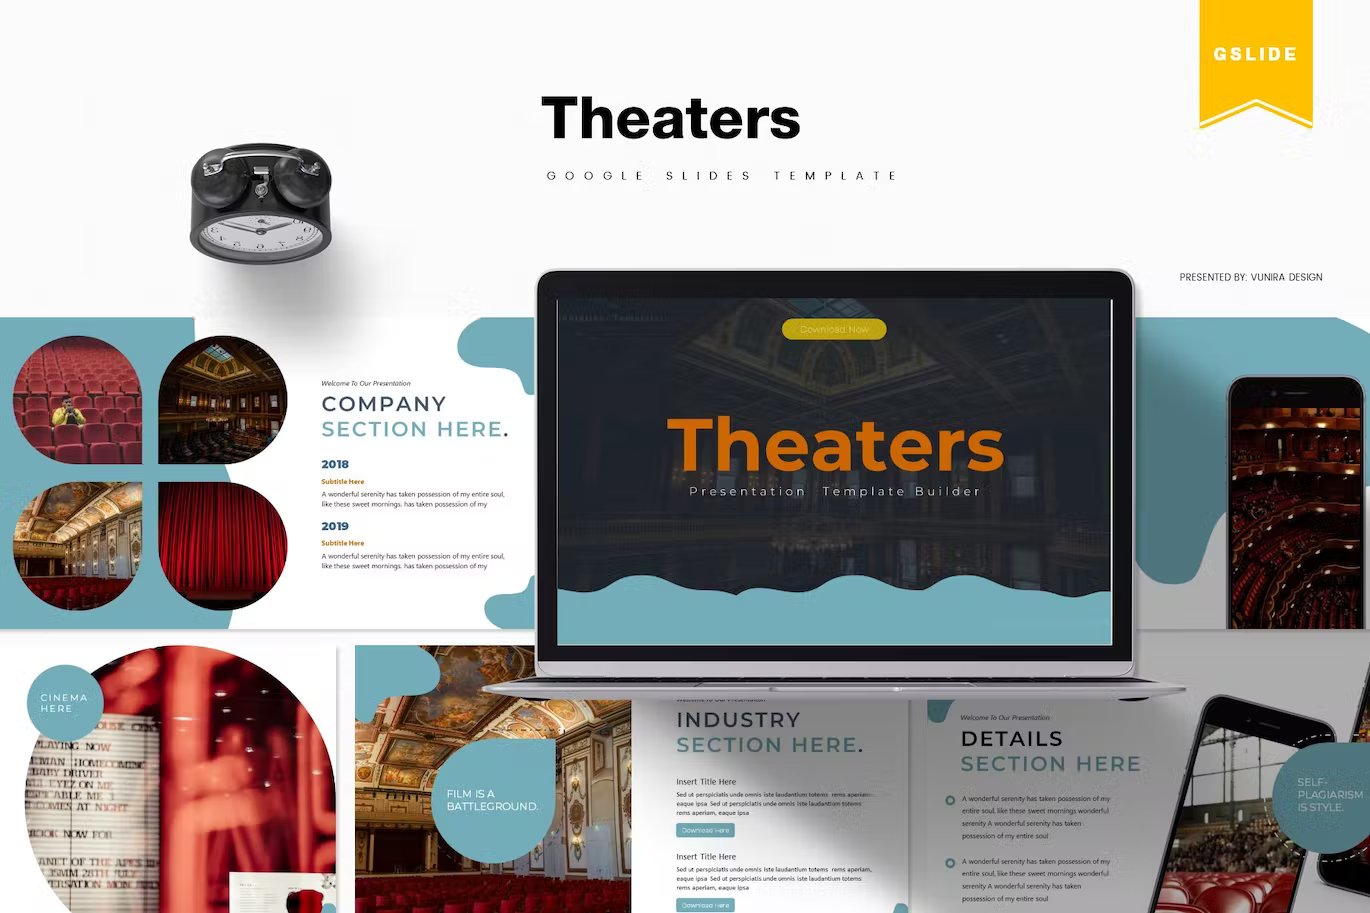 Black lettering "Theaters Google Slides Template" and different presentation templates on a white background.